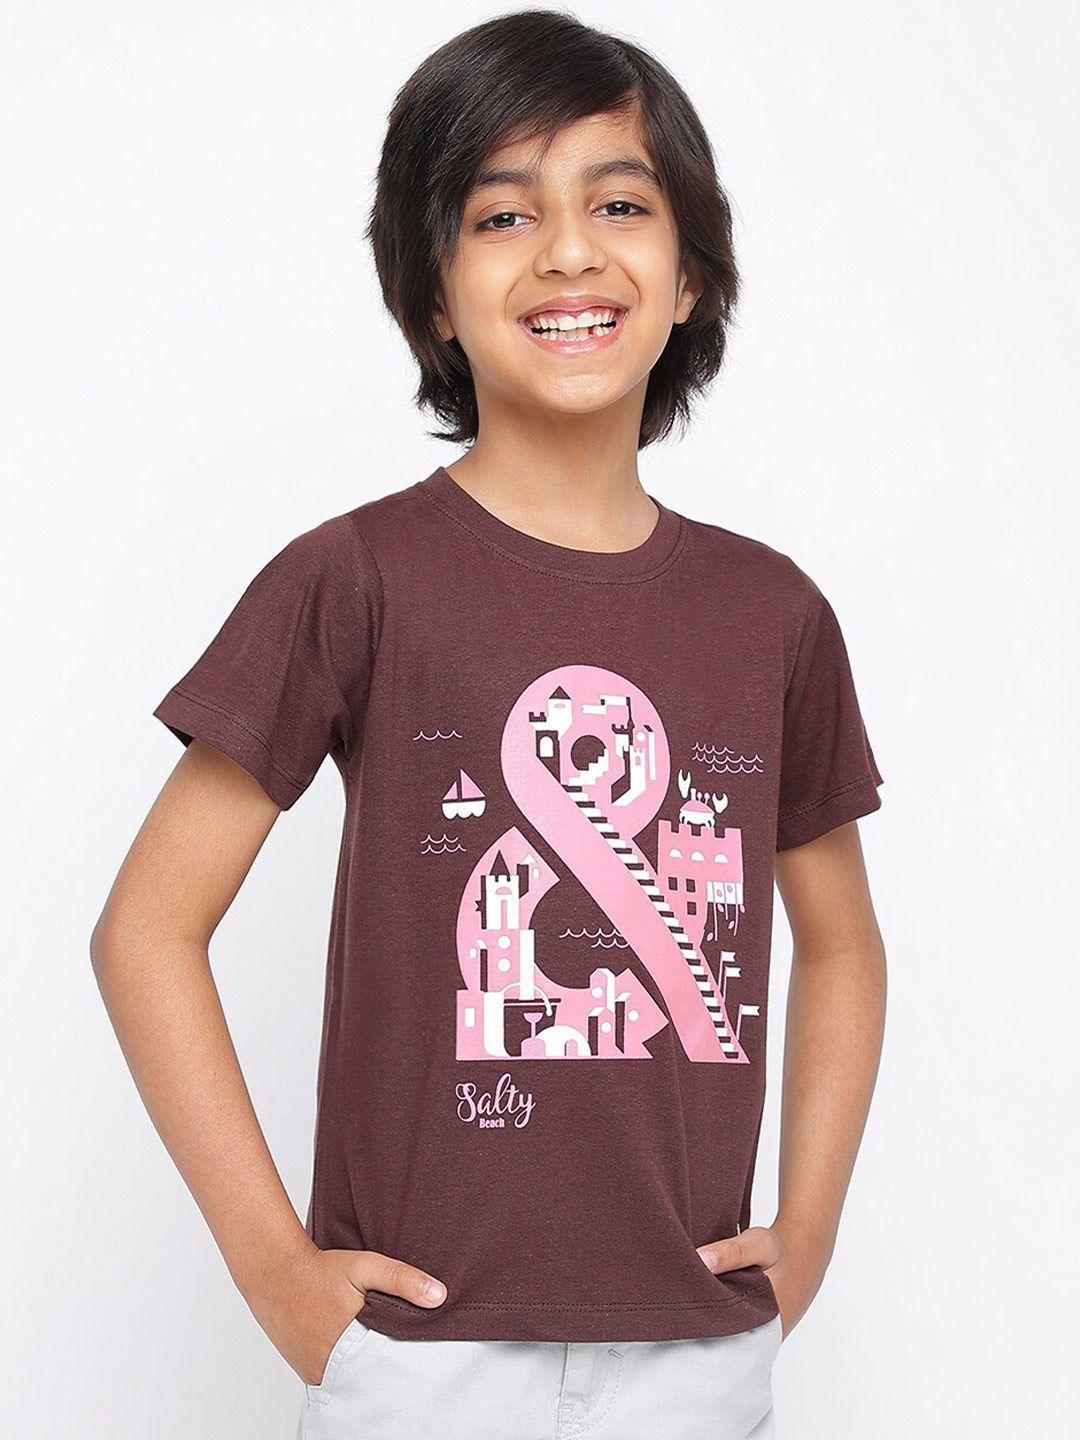 tales & stories boys brown printed extended sleeves t-shirt